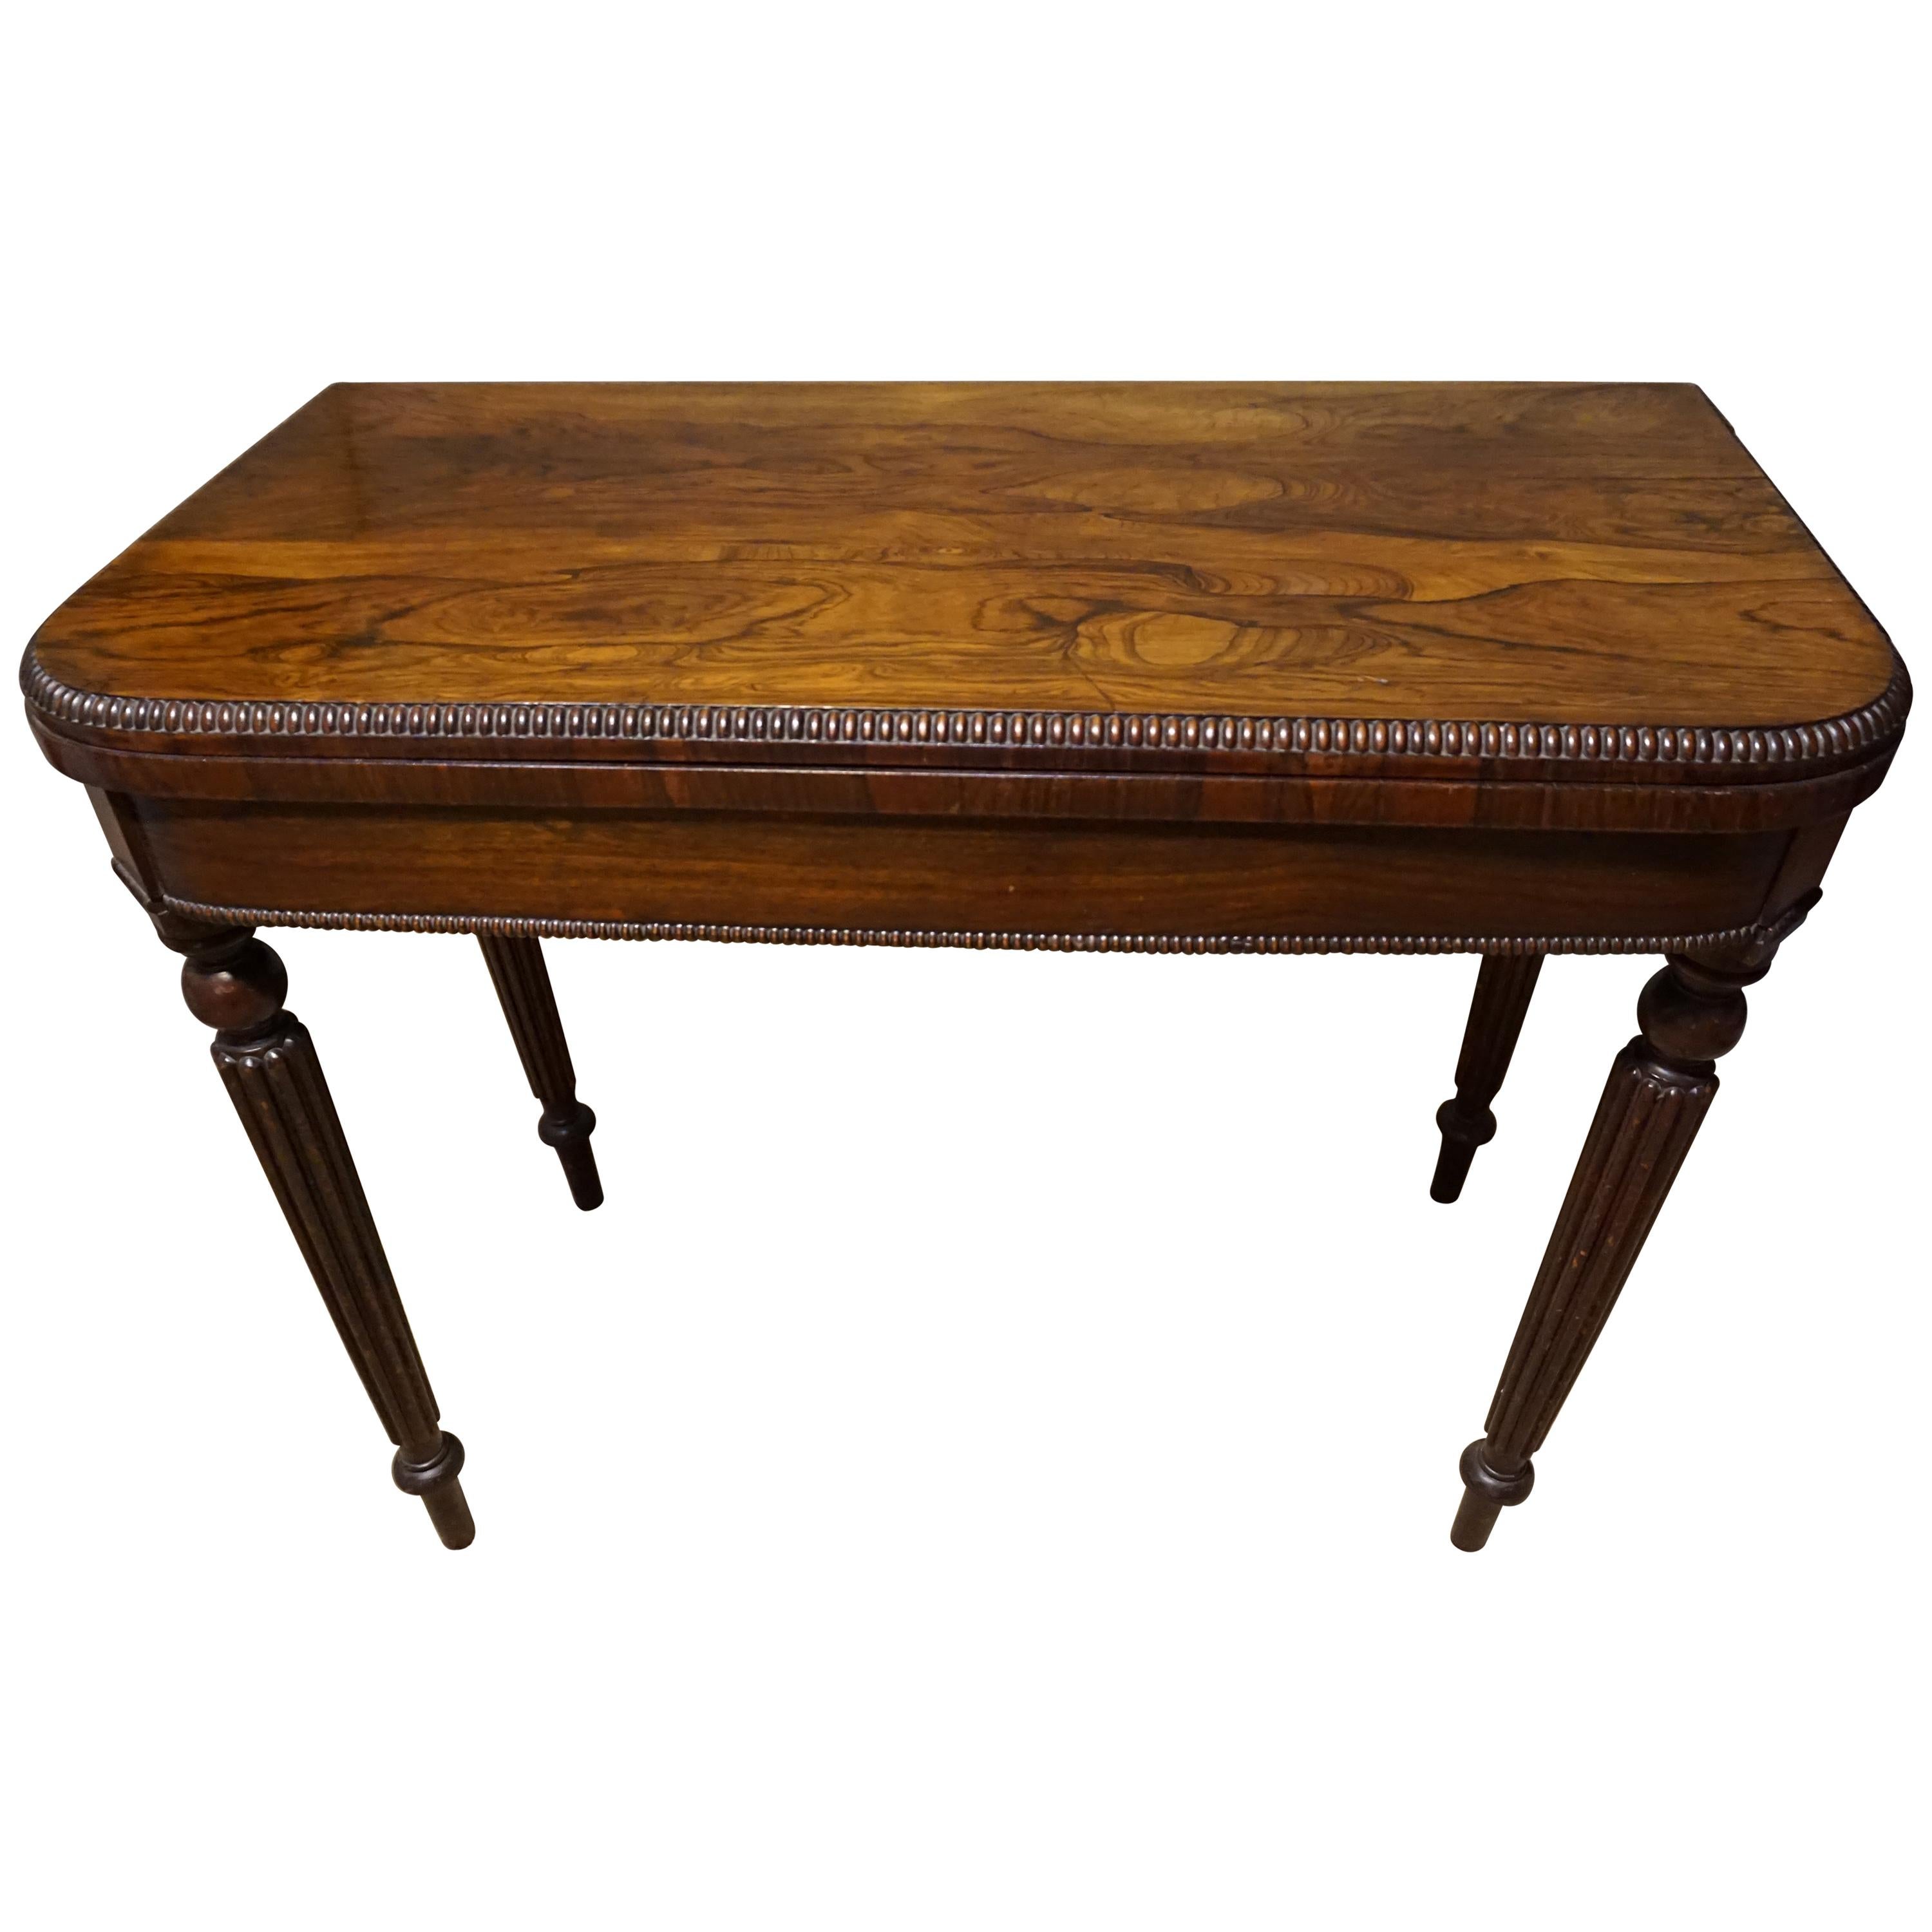 Victorian Rosewood Games Table with Carved Legs and Beaded Edge